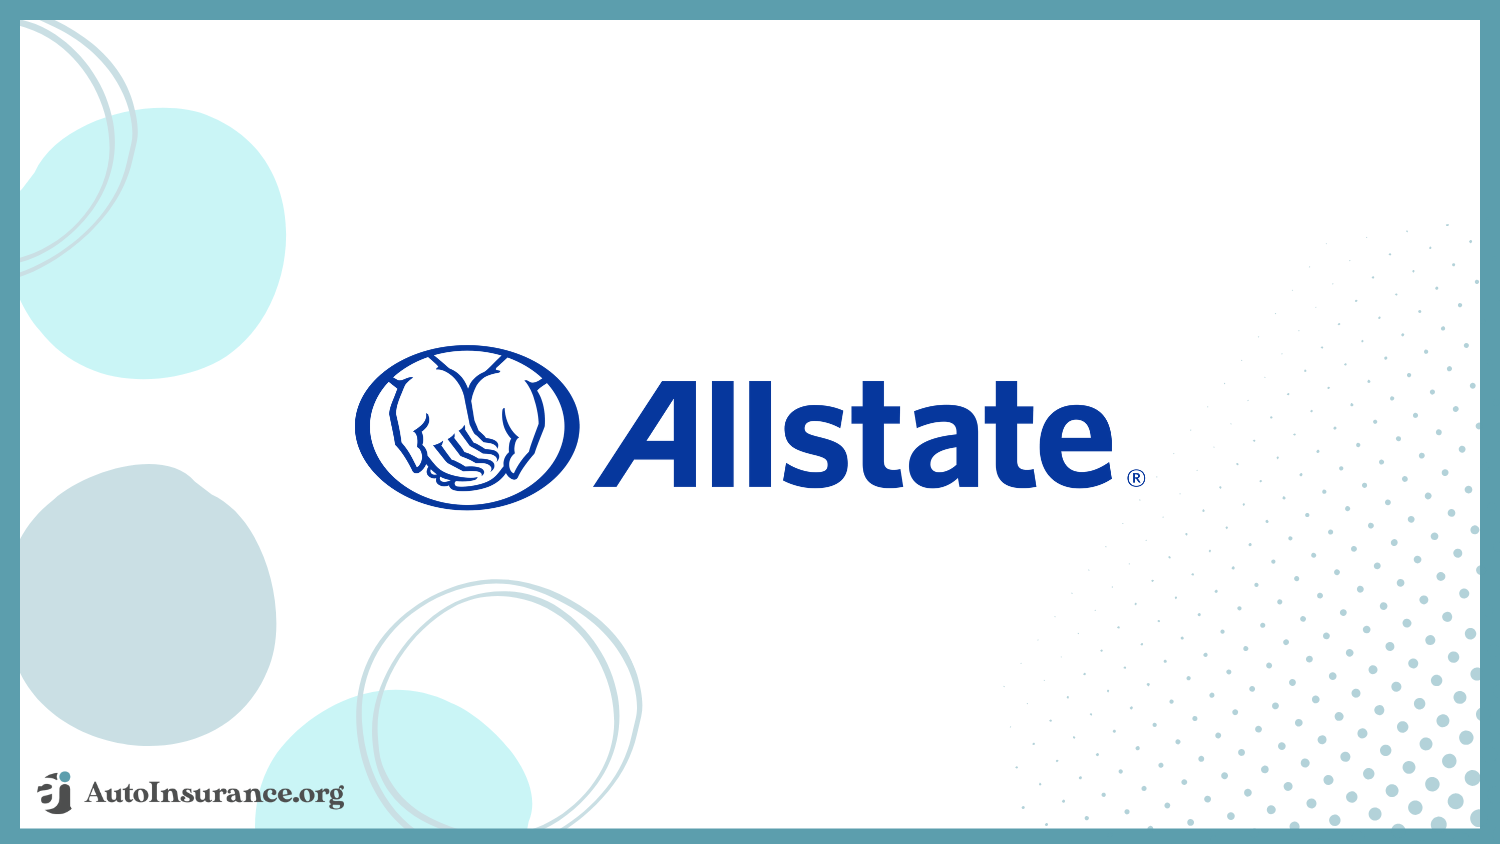 Allstate: Best Auto Insurance for Wheelchair-Accessible Vehicles